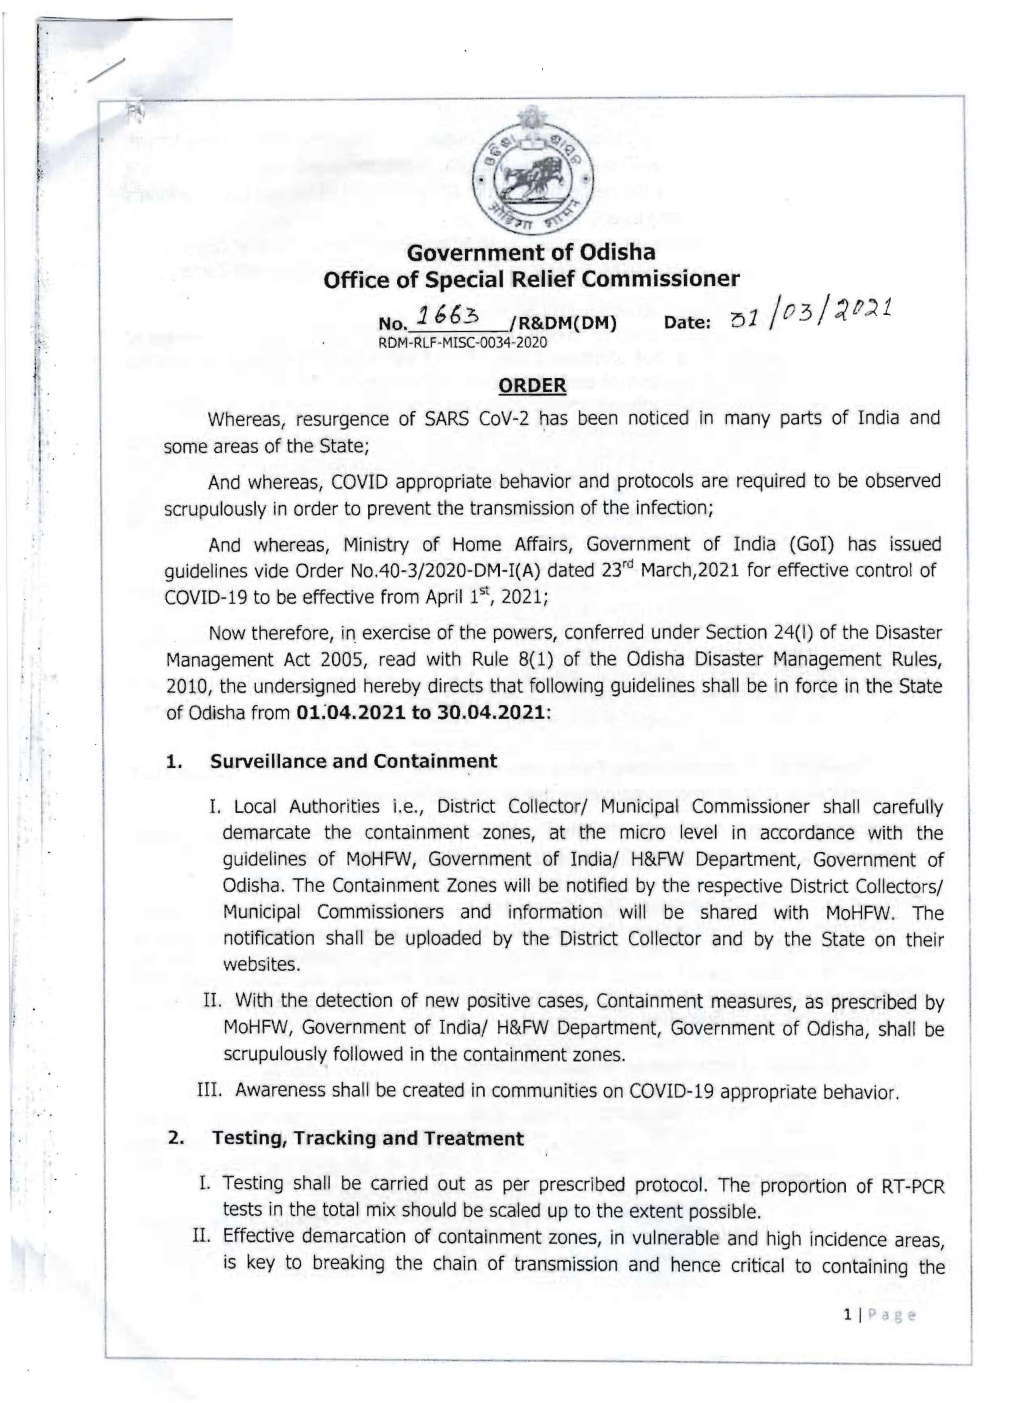 Government of Odisha Office of Special Relief Commissioner